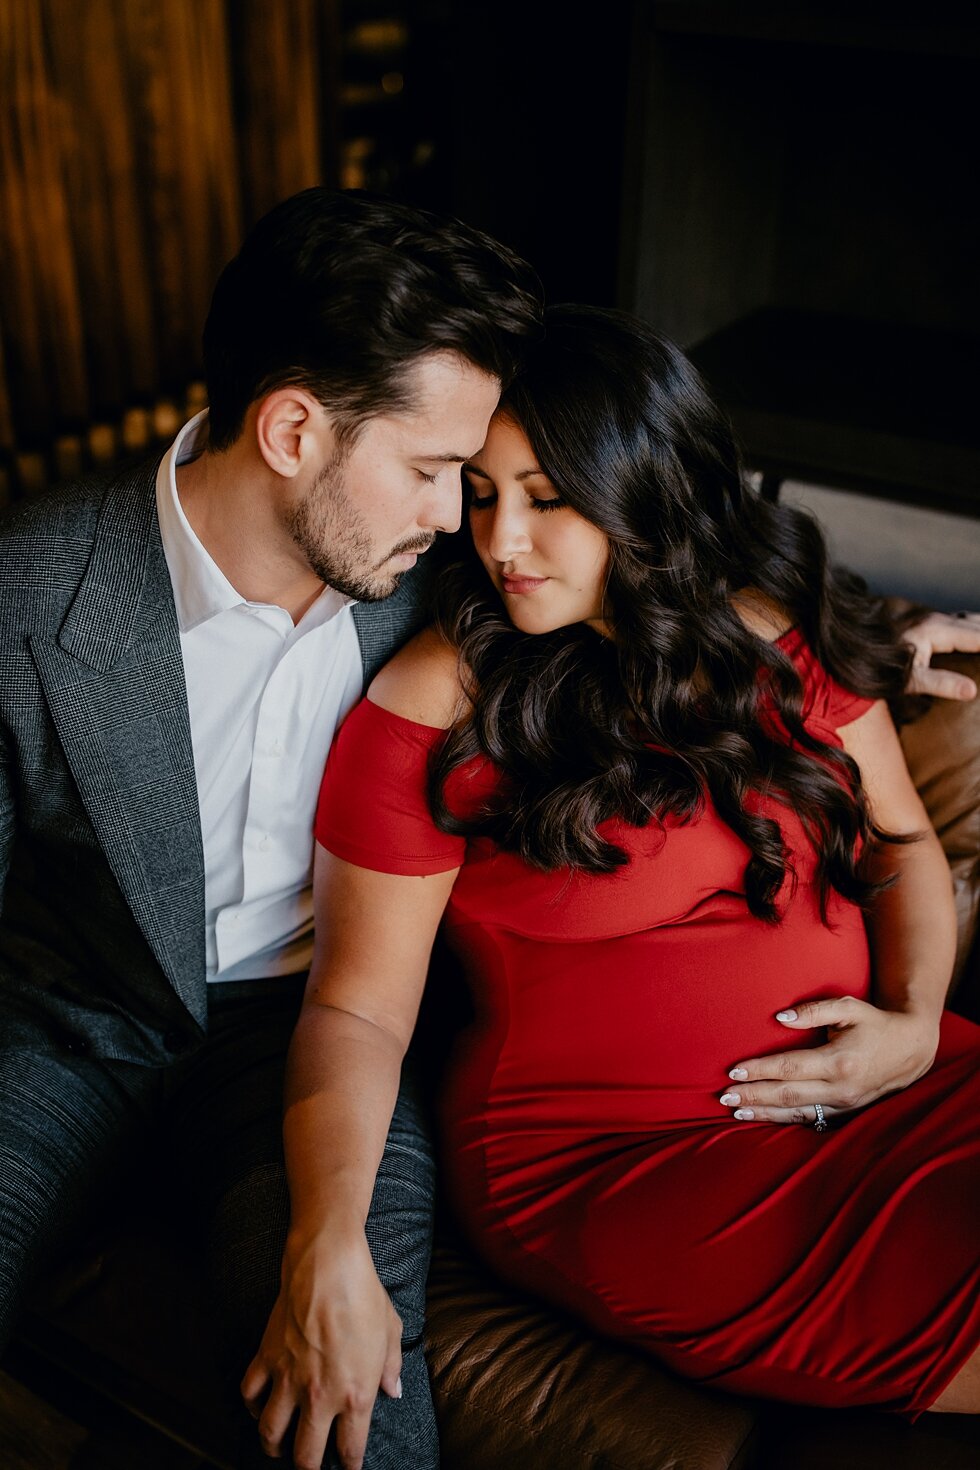  Elegance and romance combined in the best way for this maternity session in Louisville, Kentucky. #maternitygoals #maternityphotographer #babybump #kentuckyphotographer #fancymaternitysession #dressymaternitysession #indianaphotographer #louisvillep